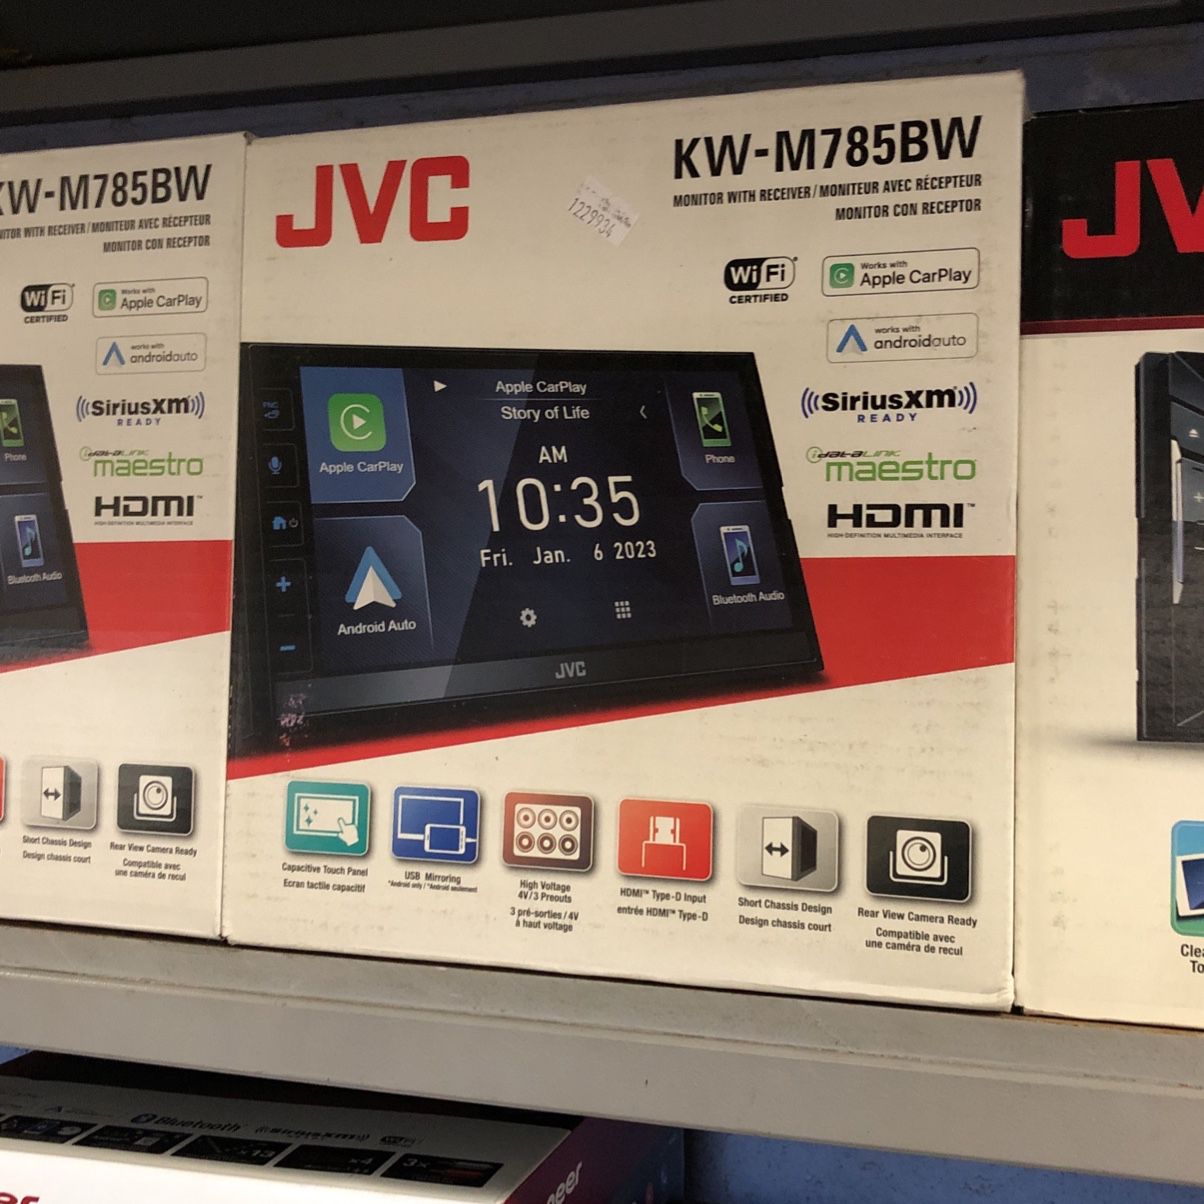 Jvc Kw-m785bw On Sale Today For 349.99